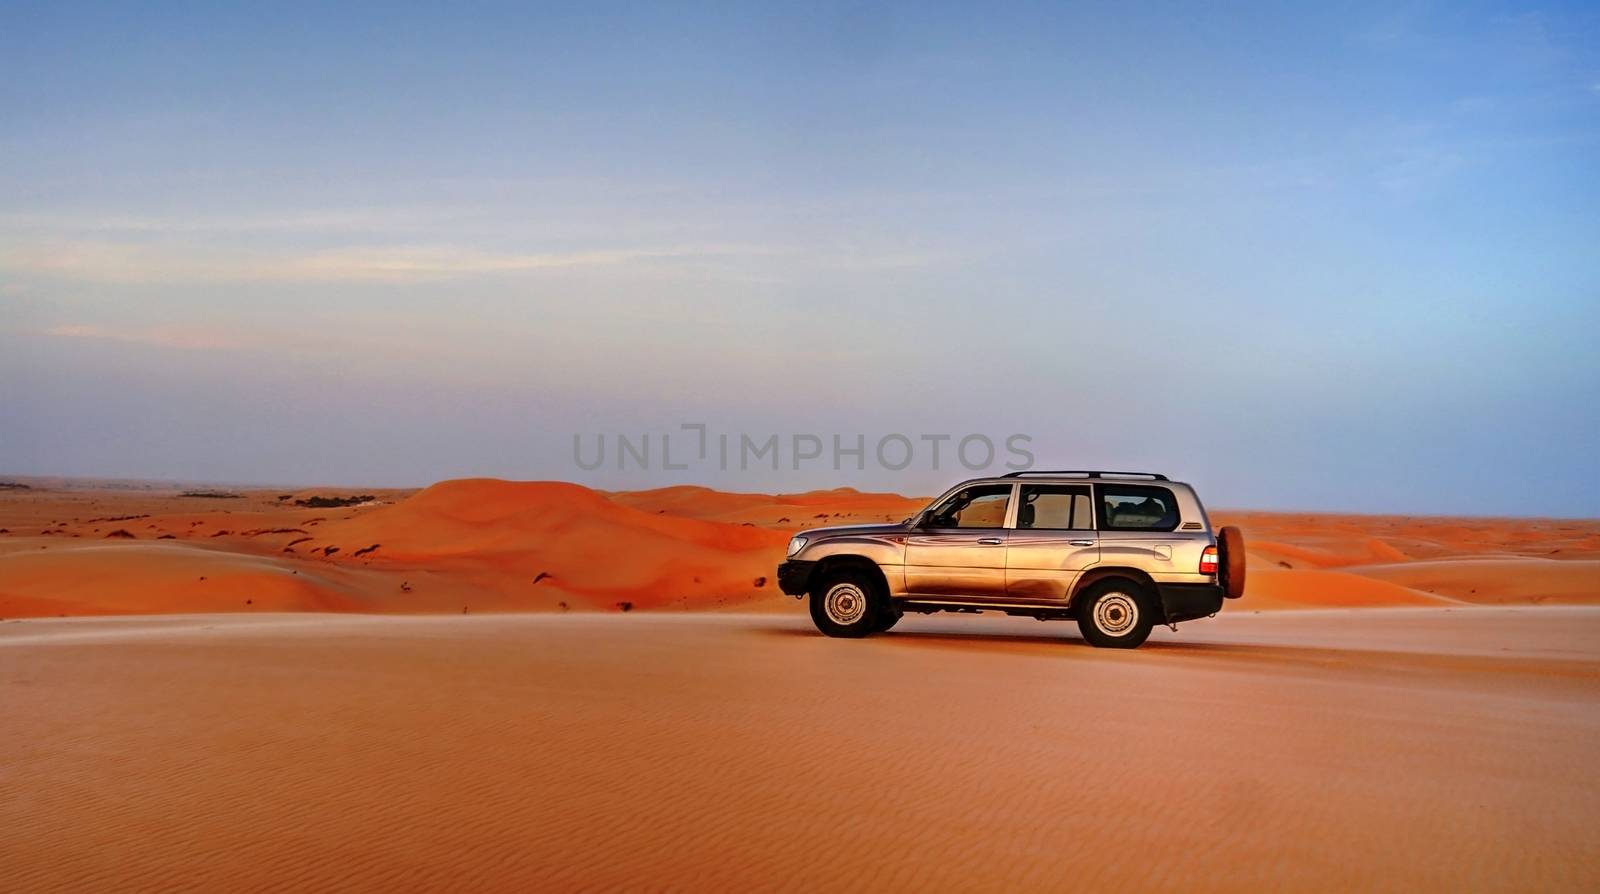 Jeep at the top of the dune by homocosmicos